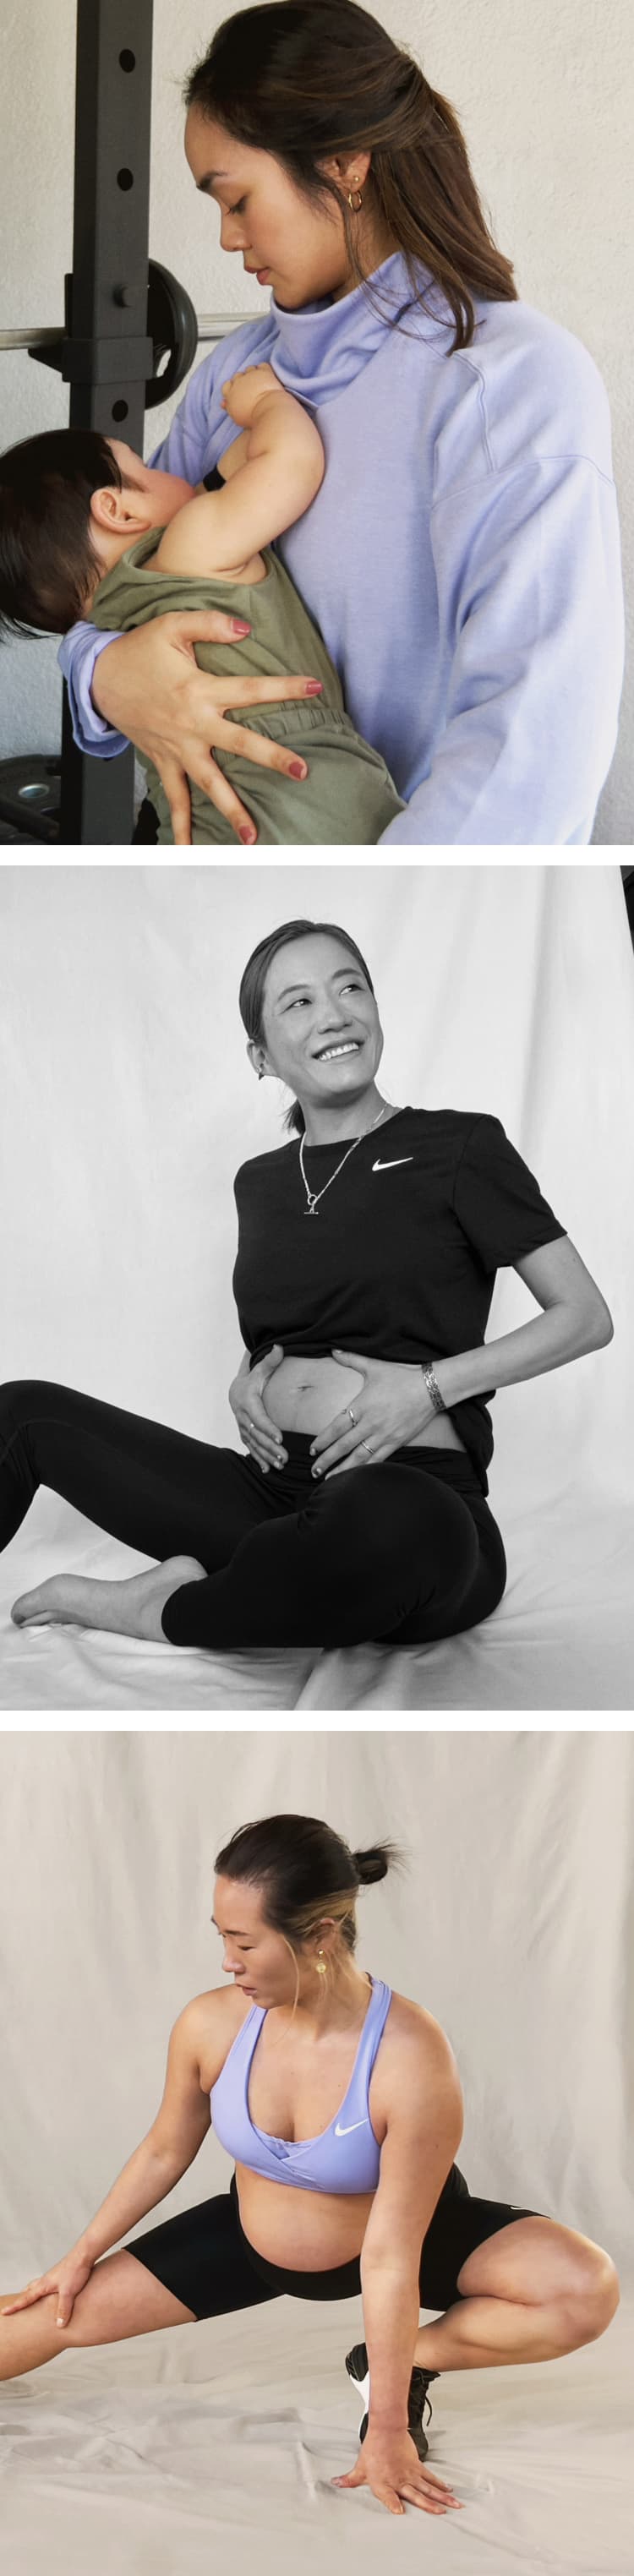 Nike Maternity Collection. Nike CH